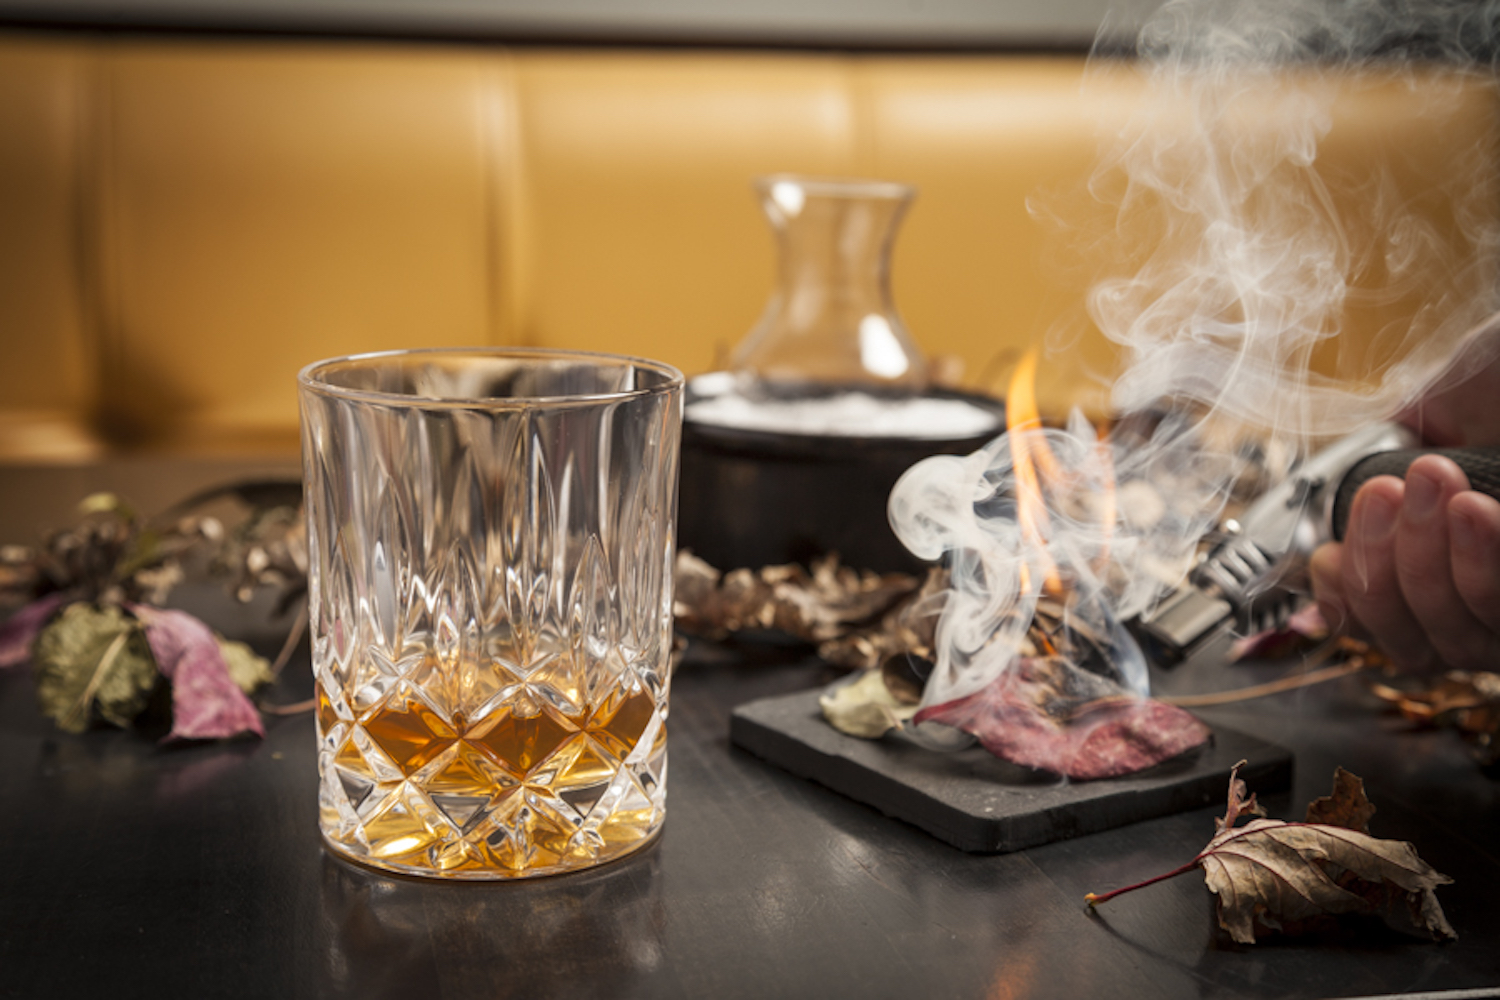 Whiskey glass partially filled with meat being smoked in the background.